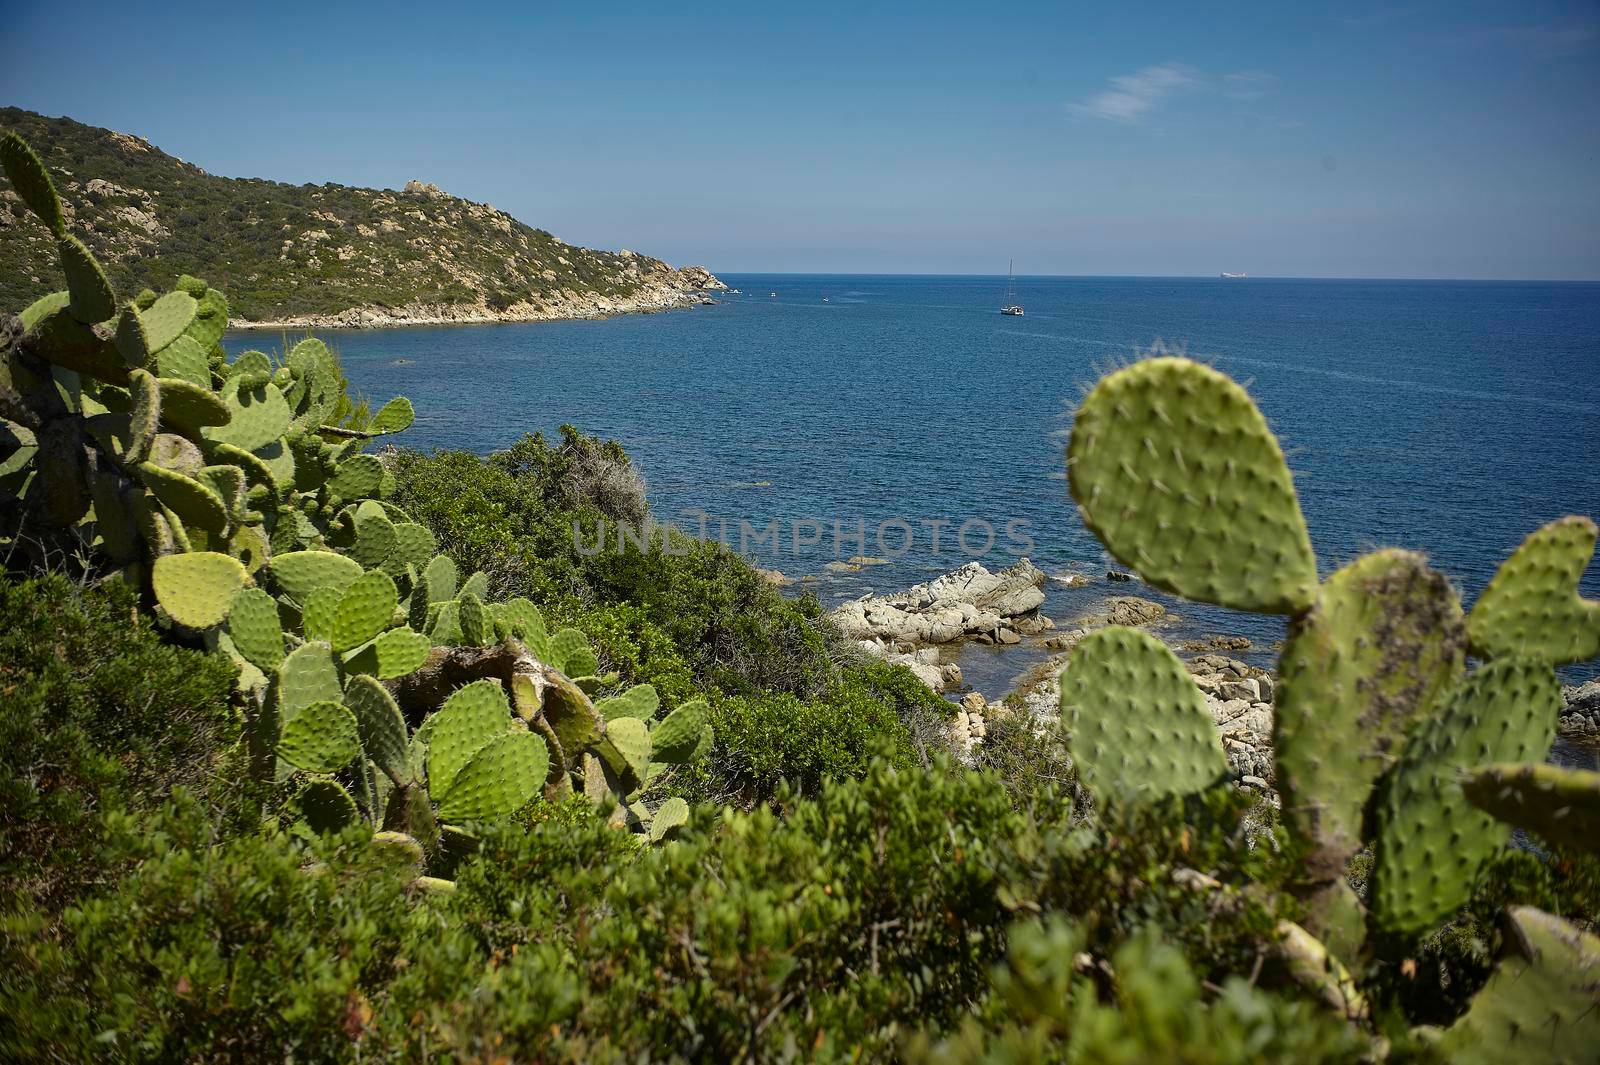 Prickly pears on the southern coast of Sardinia. by pippocarlot